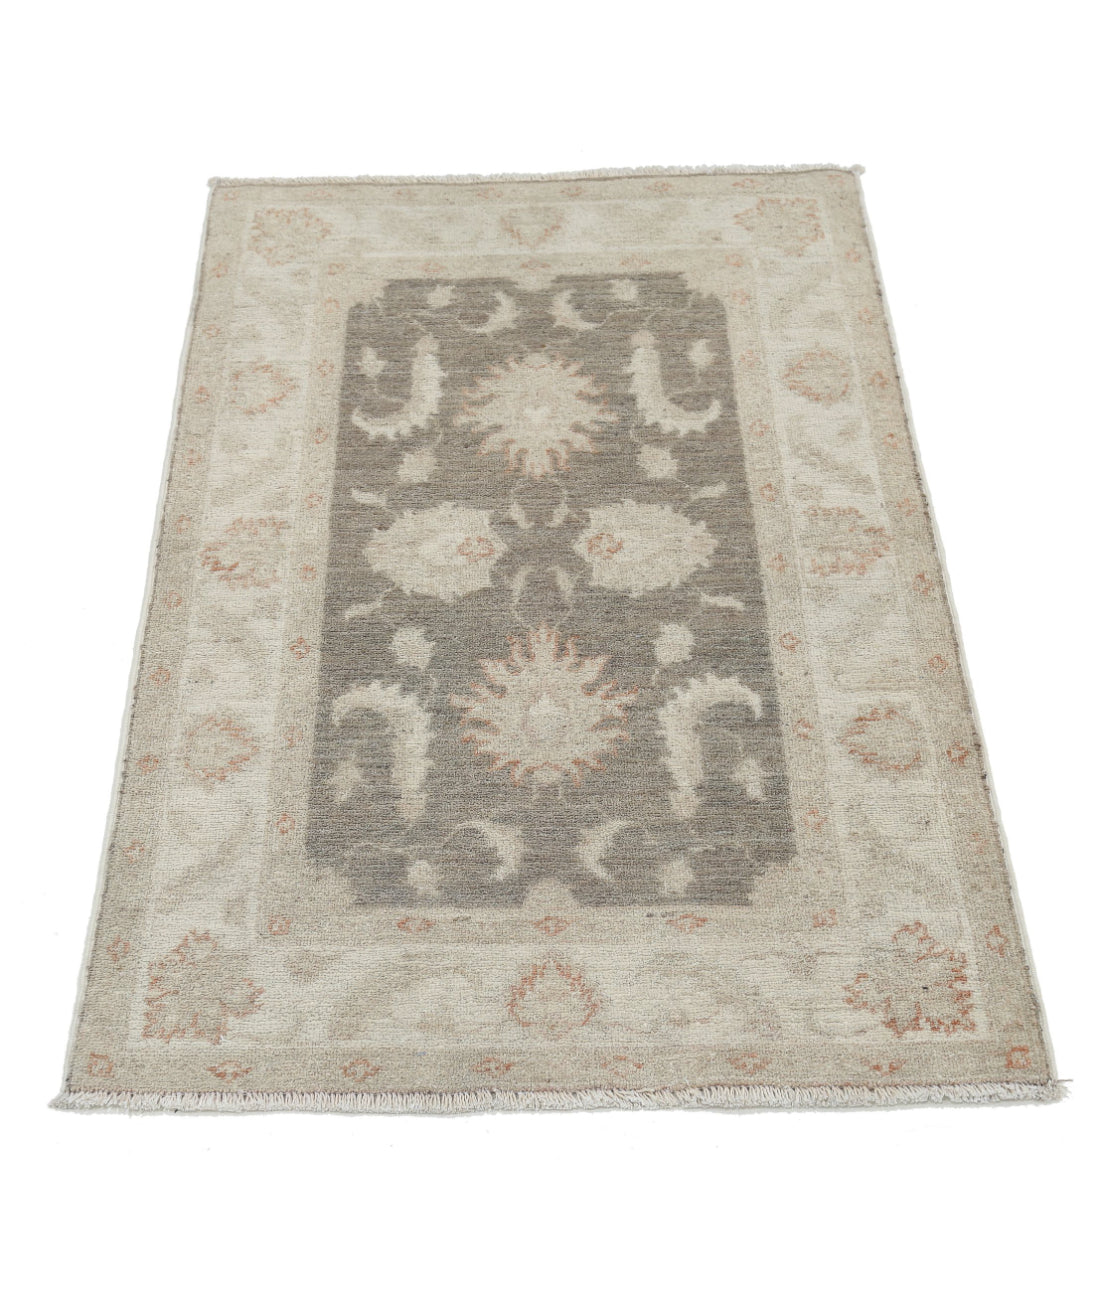 Hand Knotted Serenity Wool Rug - 2'7'' x 3'11'' 2'7'' x 3'11'' (78 X 118) / Brown / Ivory